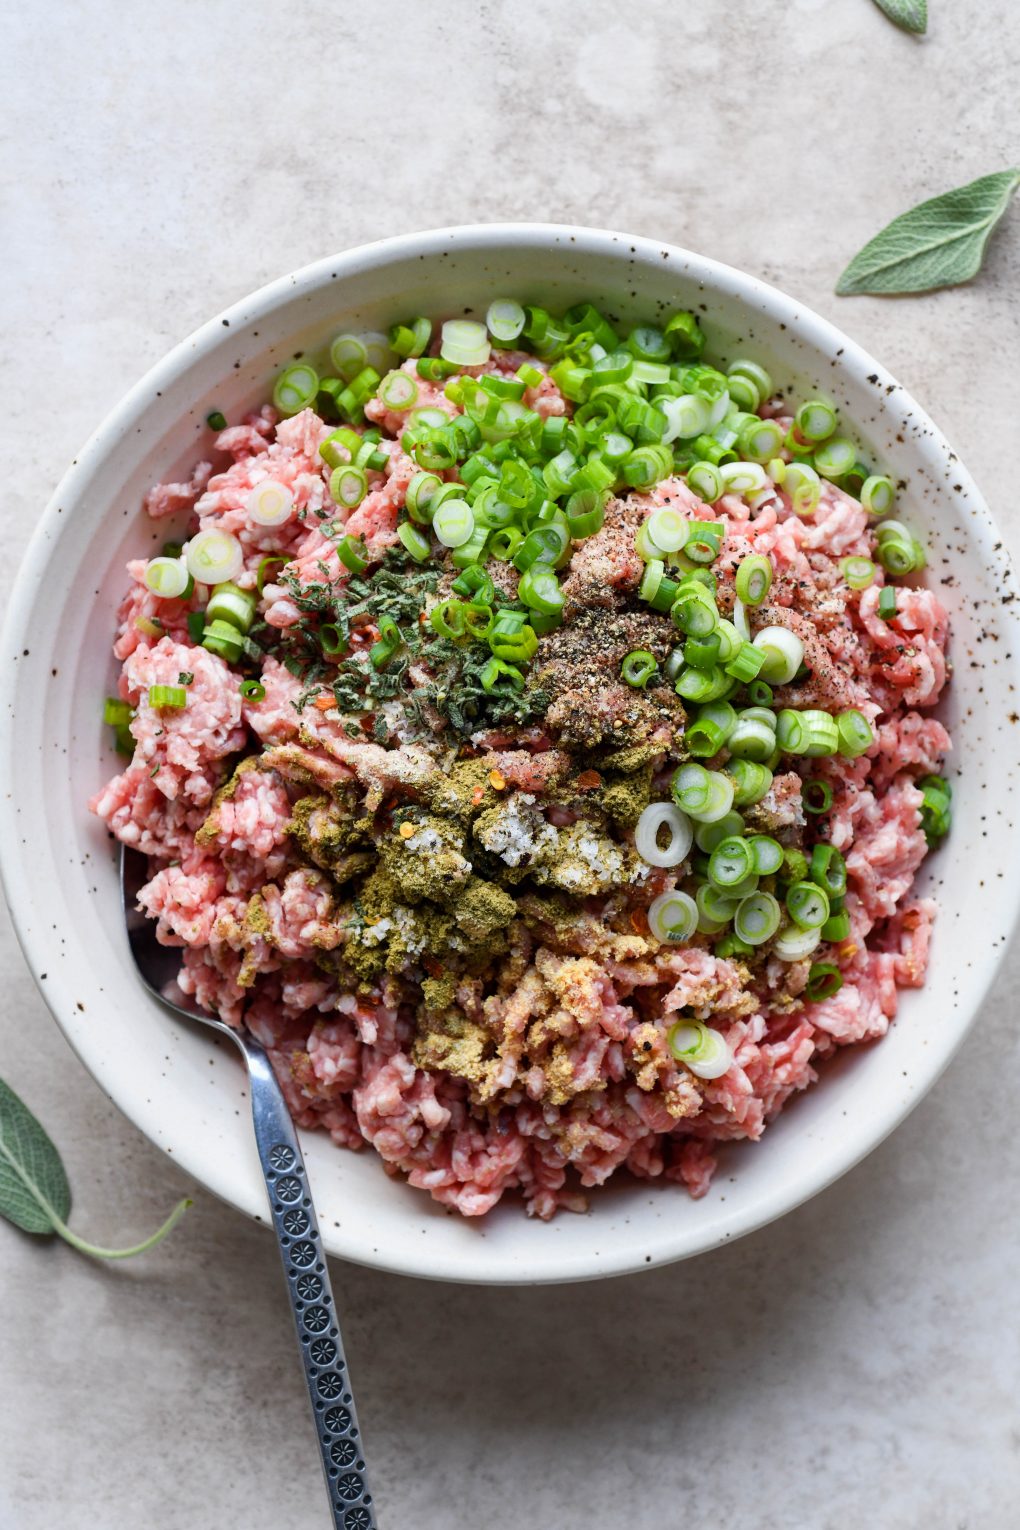 Overhead shot of a light colored speckled bowl with whole30 pork sausage ingredients - ground pork, spices, salt, pepper, sliced green onions, chili flakes, and chopped fresh sage. On a creamy colored background with an antique spoon tucked into the bowl. 